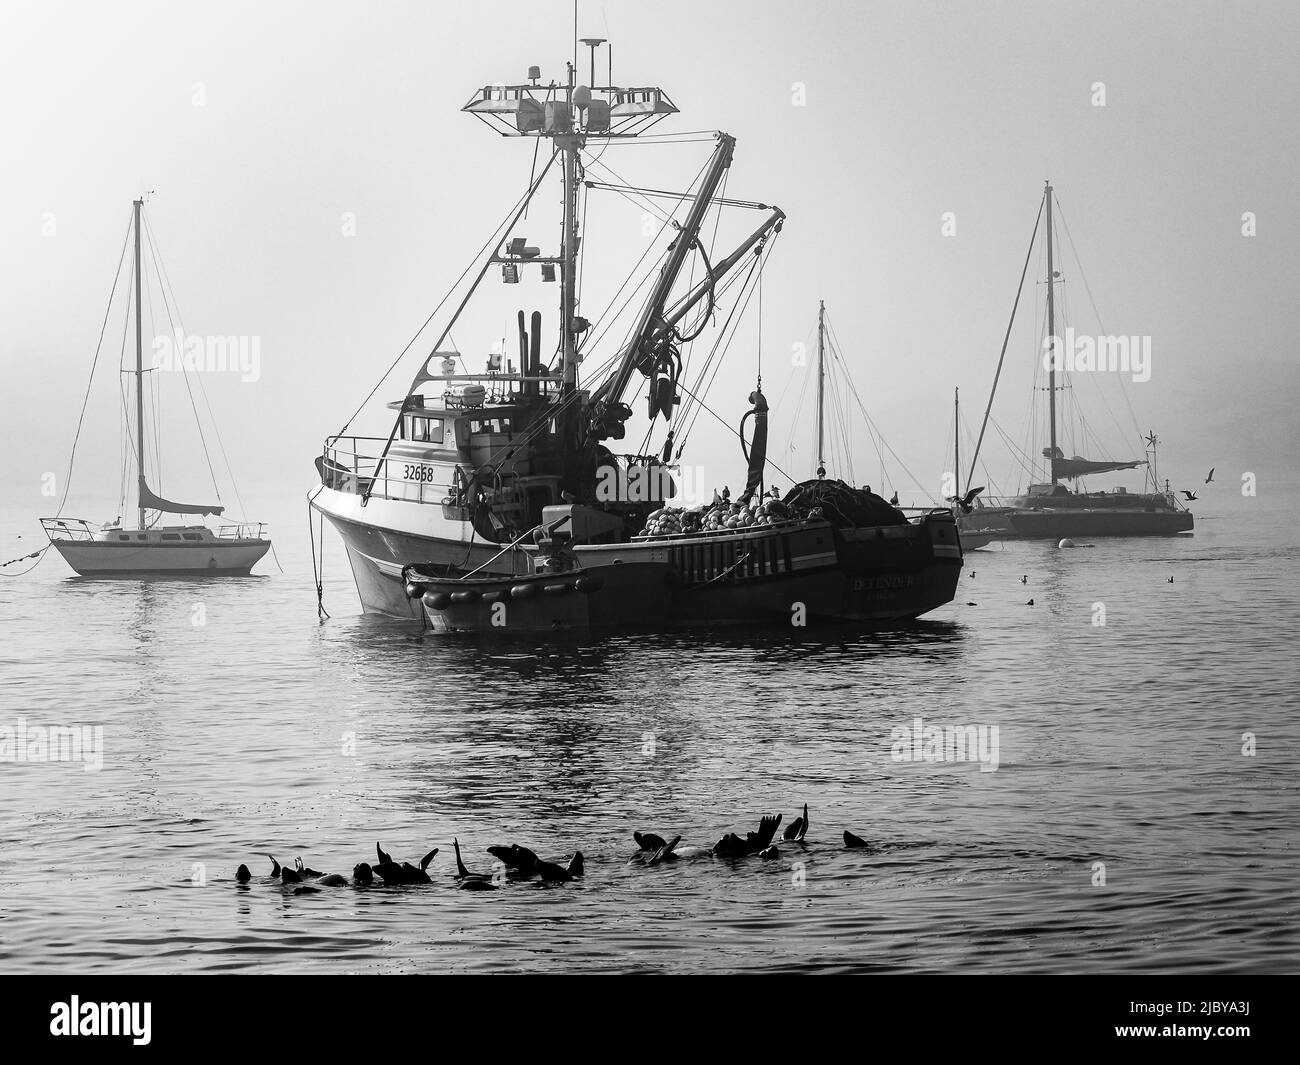 Black and White, Not a true Refuge, Squid fishing boats in Monterey Bay, Monterey Bay National Marine Refuge, California Stock Photo